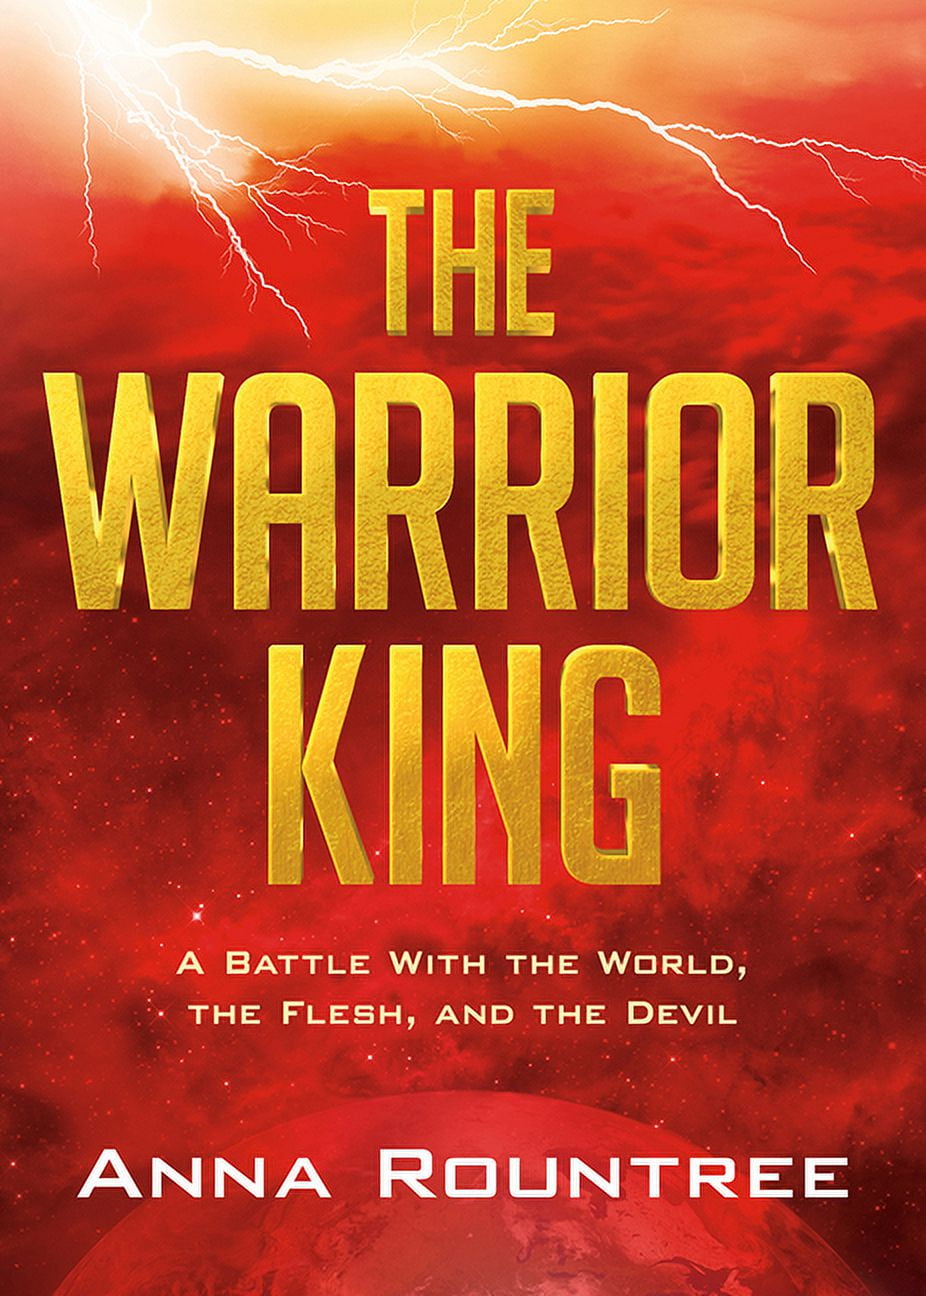 King　the　Devil　the　Flesh,　Warrior　Battle　With　the　A　and　World,　The　Paperback)